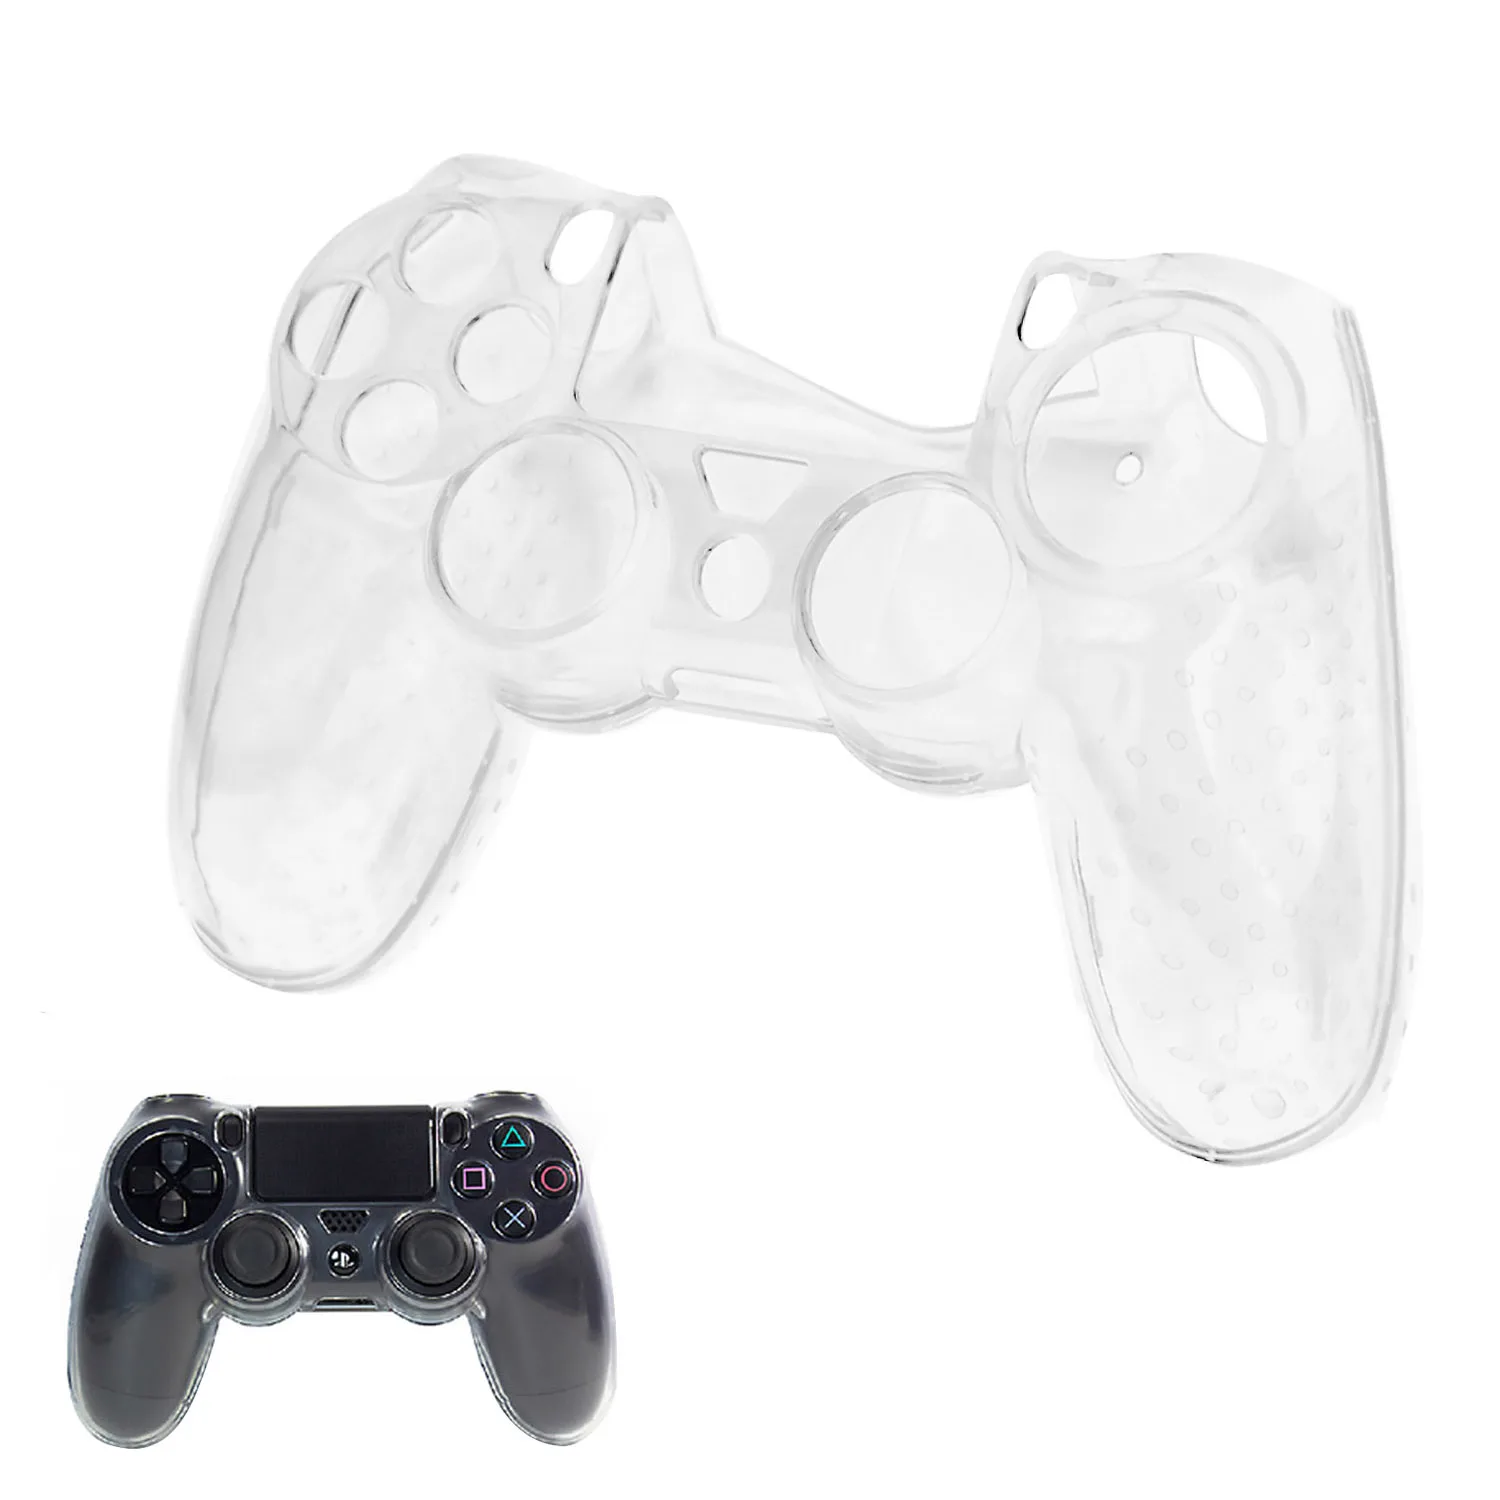 

Bevigac Clear Hard Case Protective Cover Skin Shell for Sony PS4 Play Station Dualshock PS 4 Console Controller Gamepad Joypad